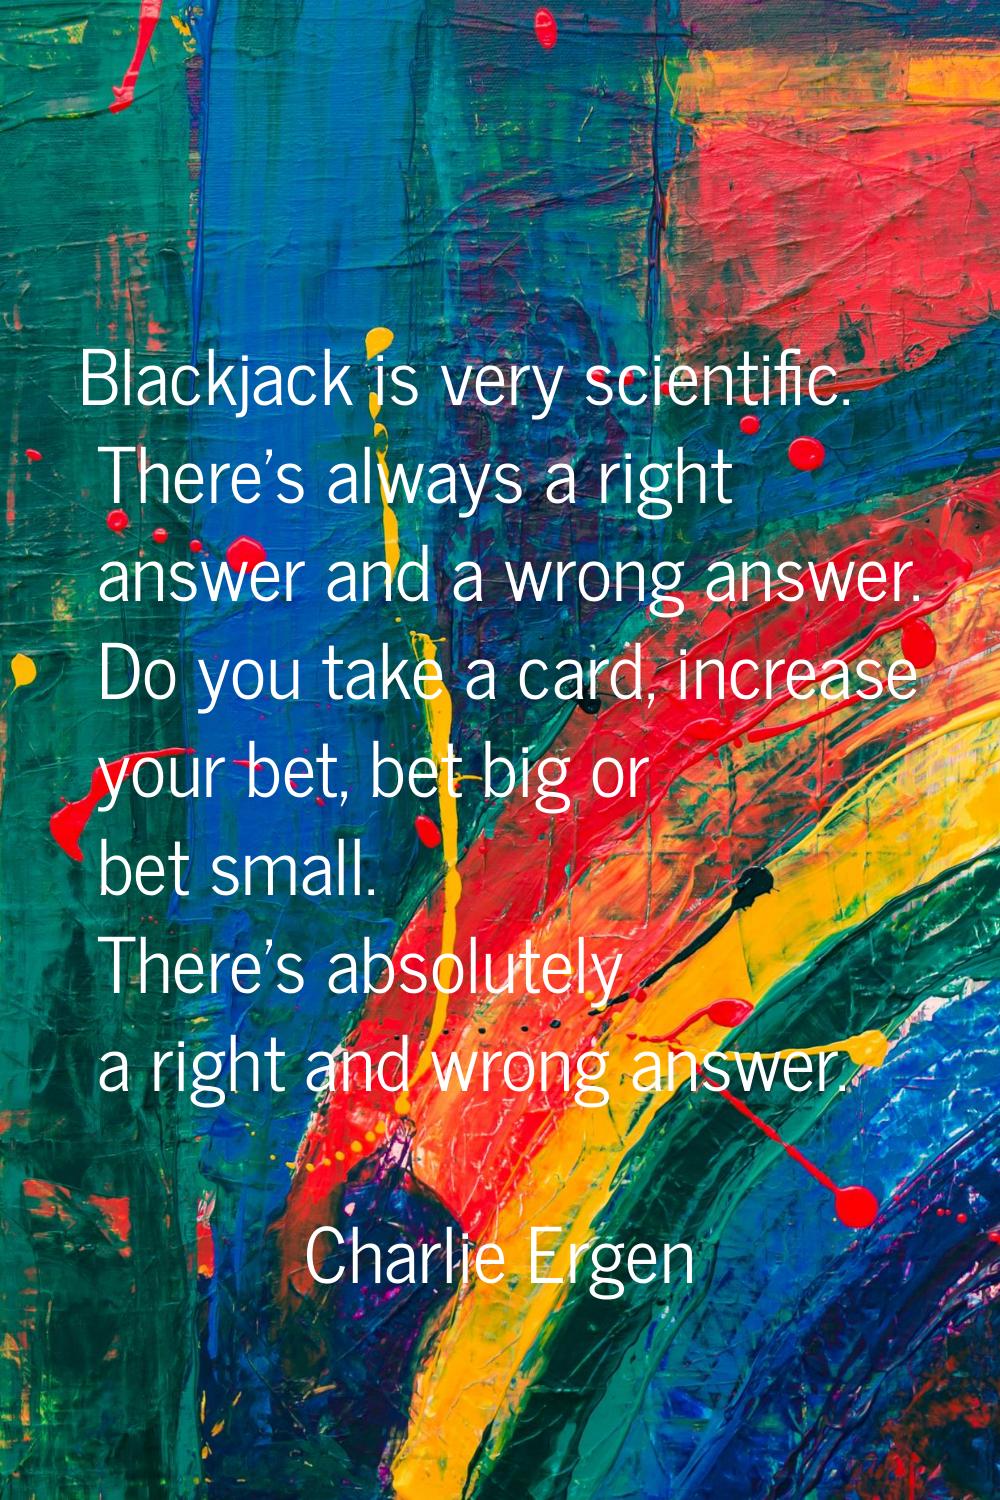 Blackjack is very scientific. There's always a right answer and a wrong answer. Do you take a card,